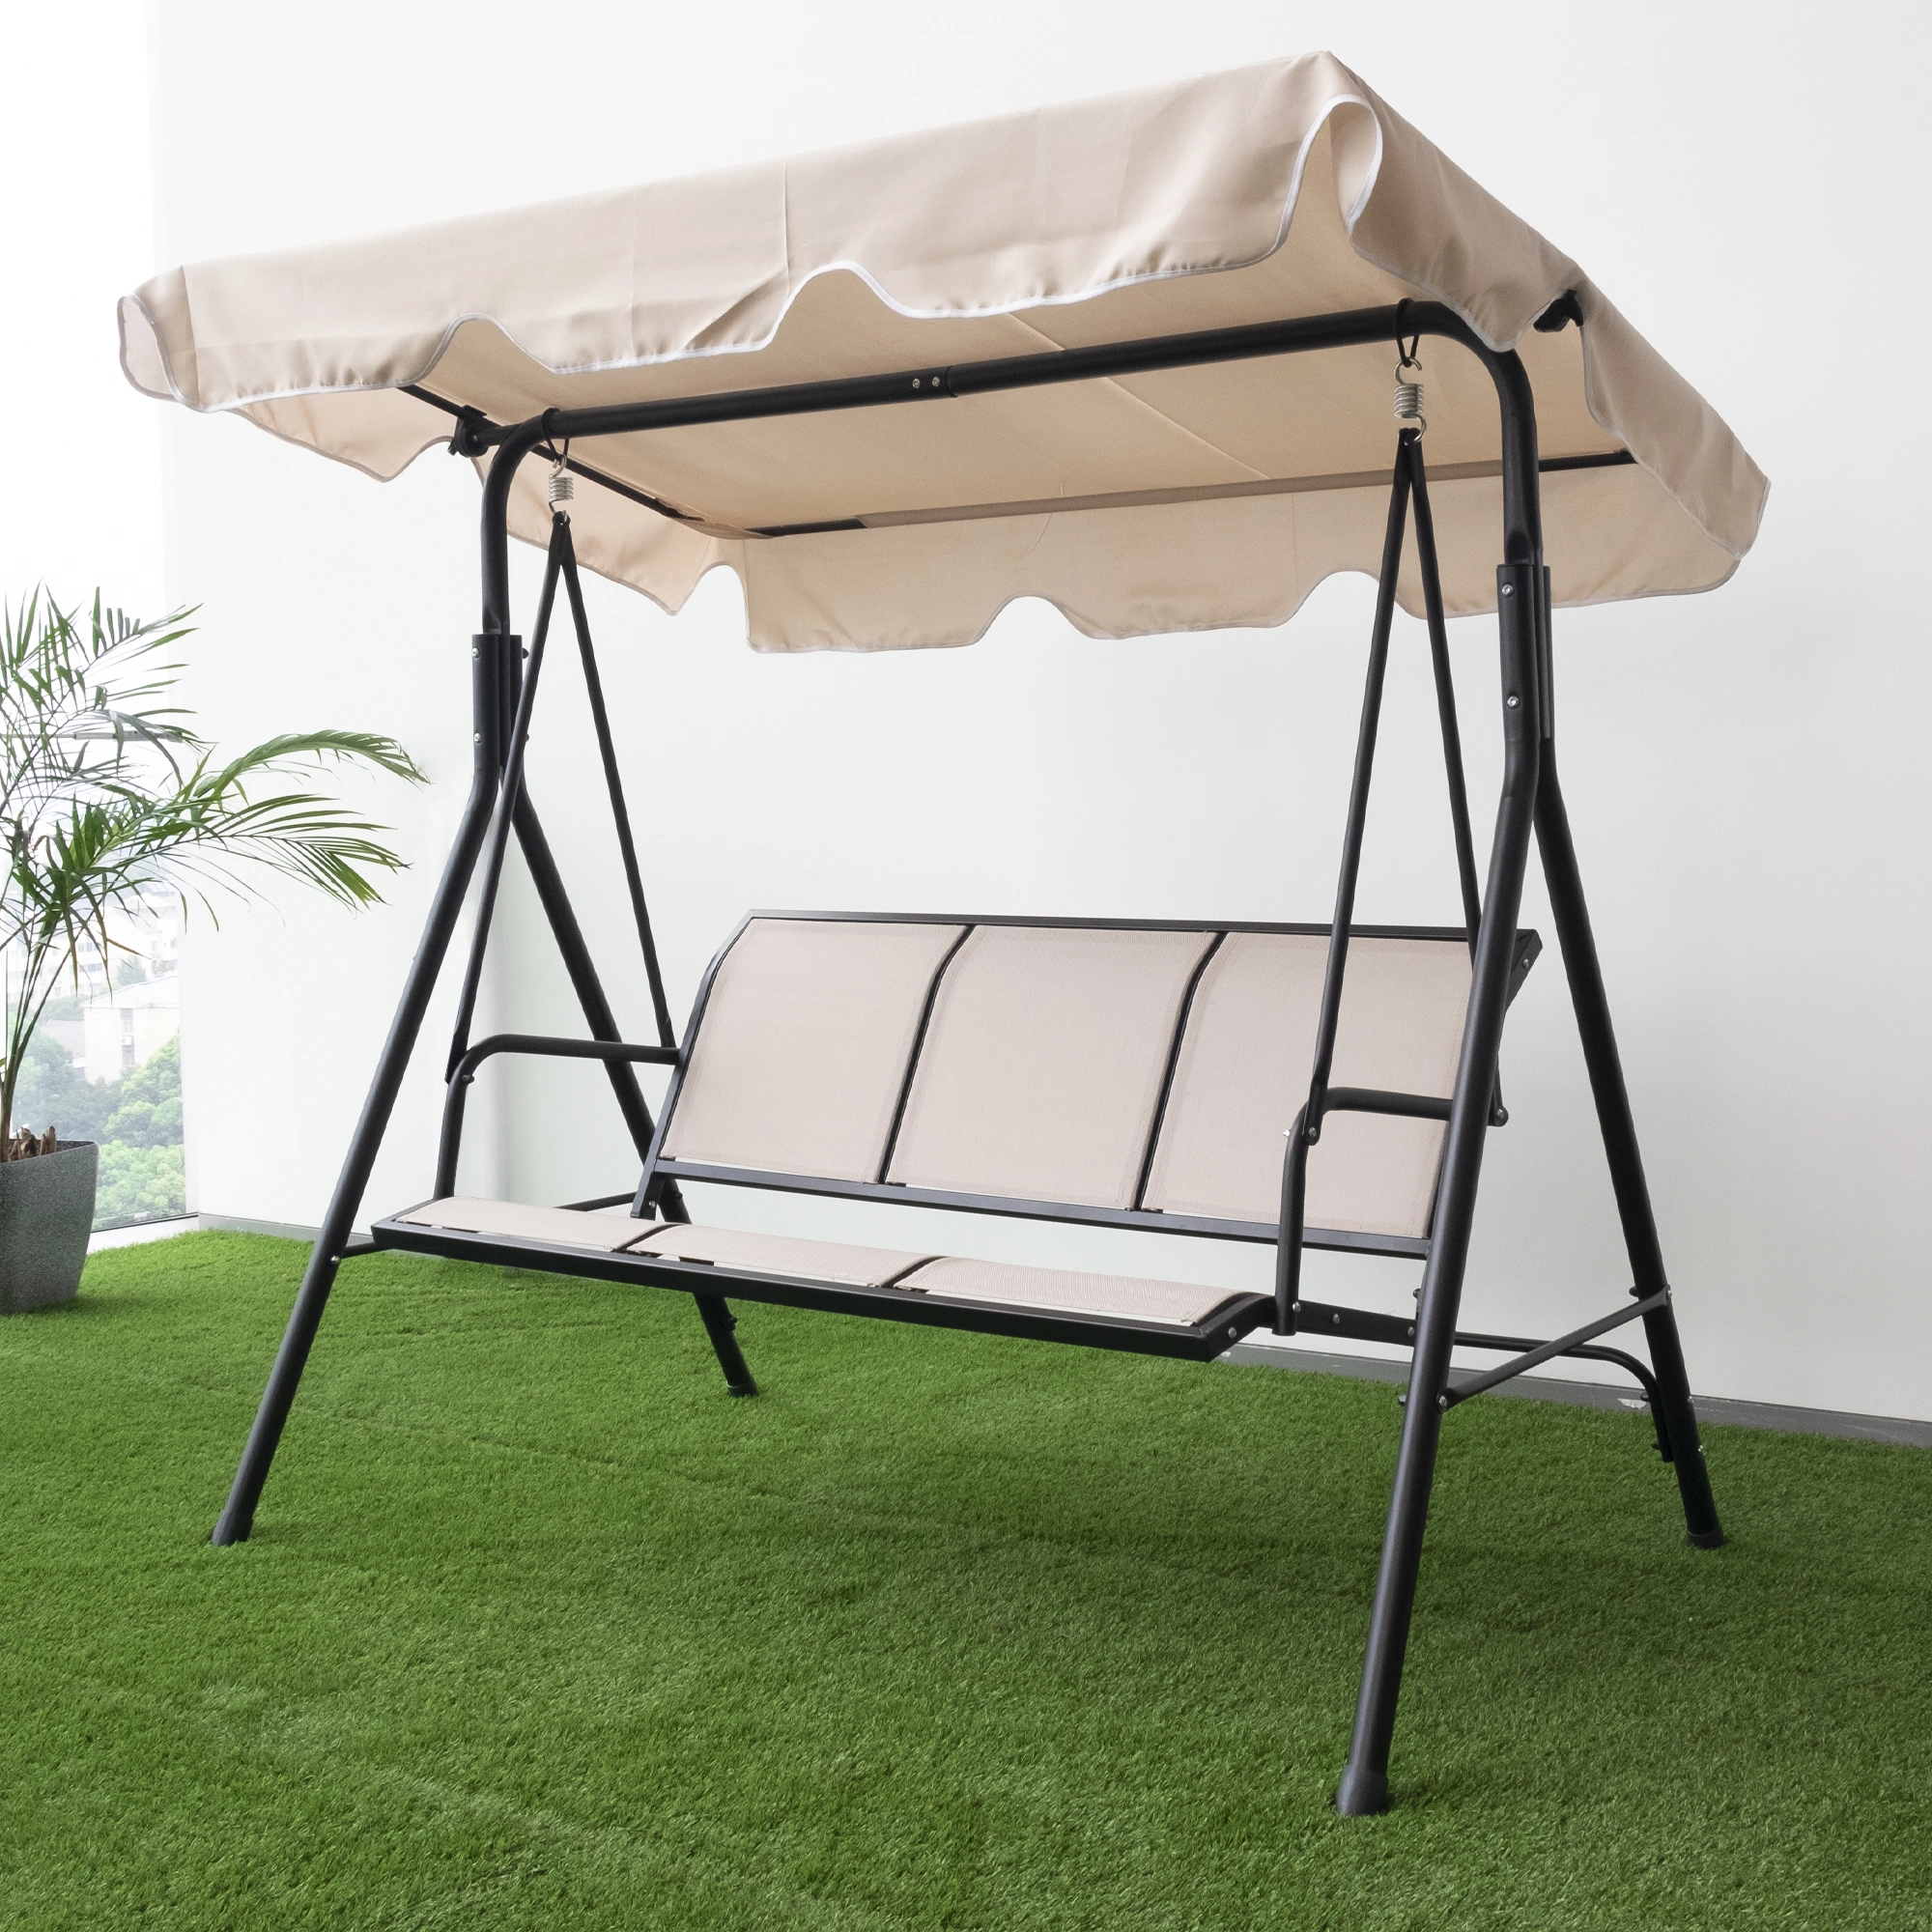 Cesicia Outdoor 12 ft. x 10 ft. x 90 in. 3-Person Beige Fabric